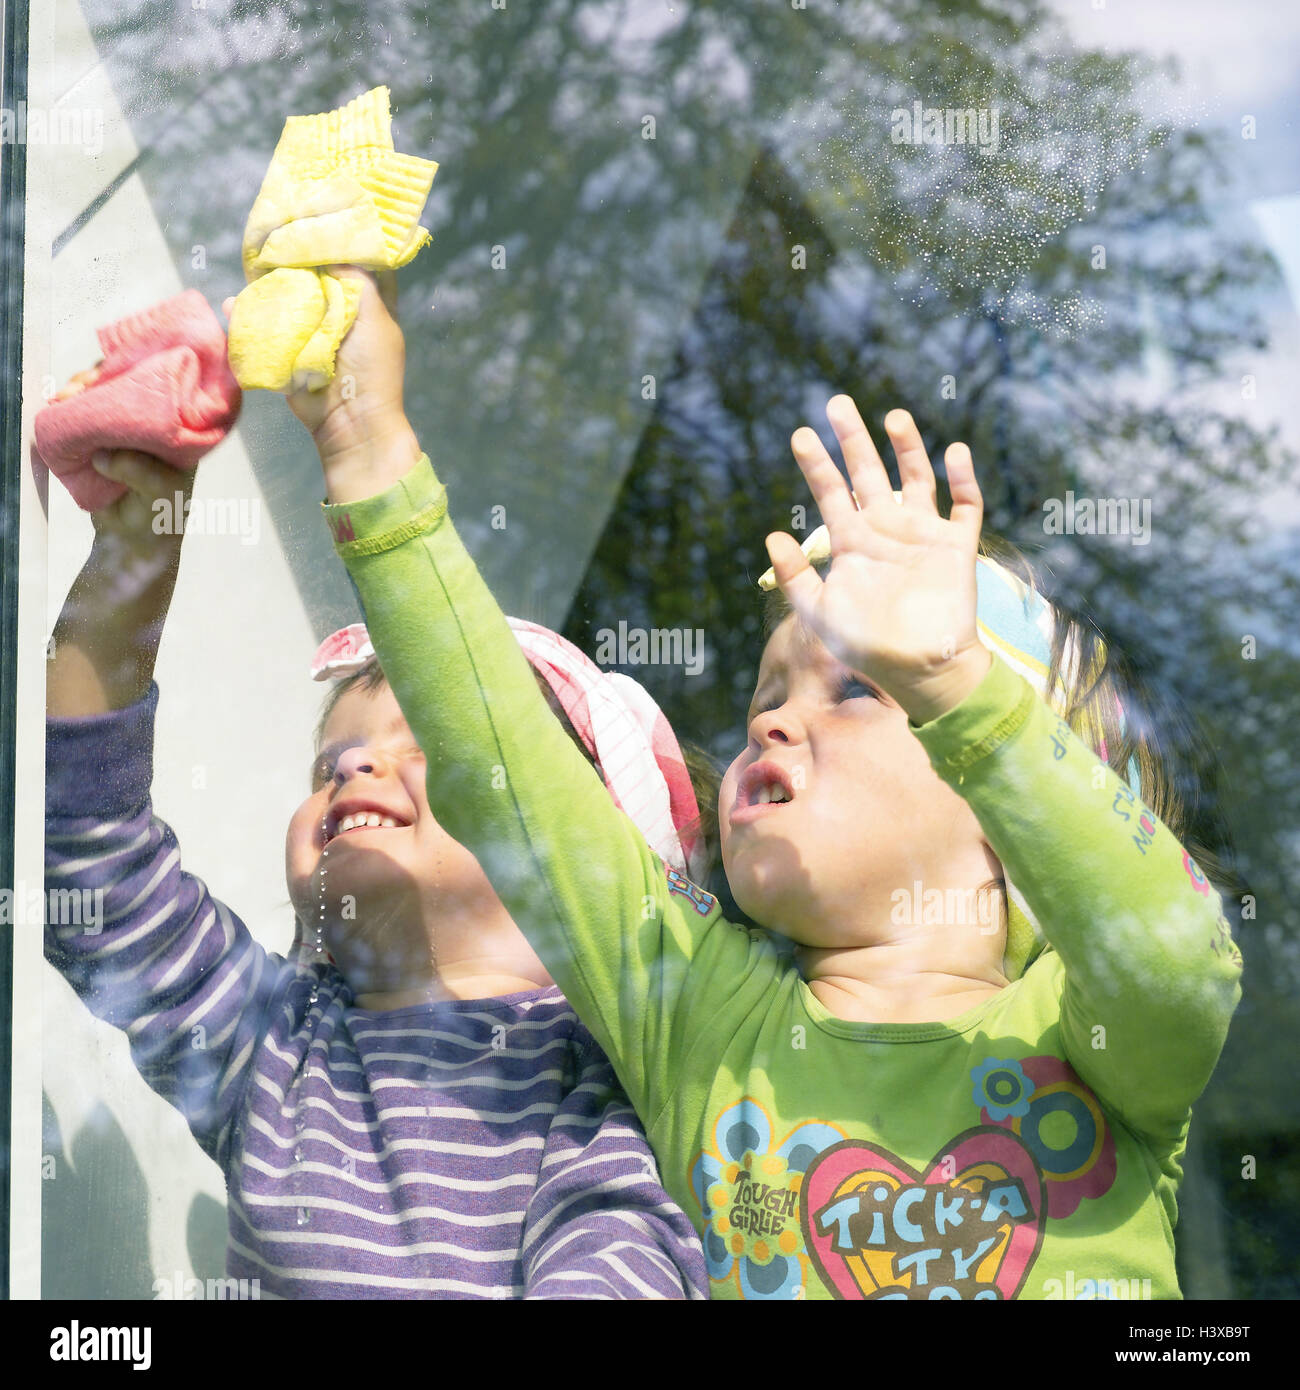 Children, girls, windows clean, detail, twins 3 years, sisters, siblings, friends, friendship, childhood, housecleaning, window plaster, 'cleaning devil', cloths, fungus cloths, windowpane, clean, dry, together, cohesion, community, motivation, ambition, Stock Photo